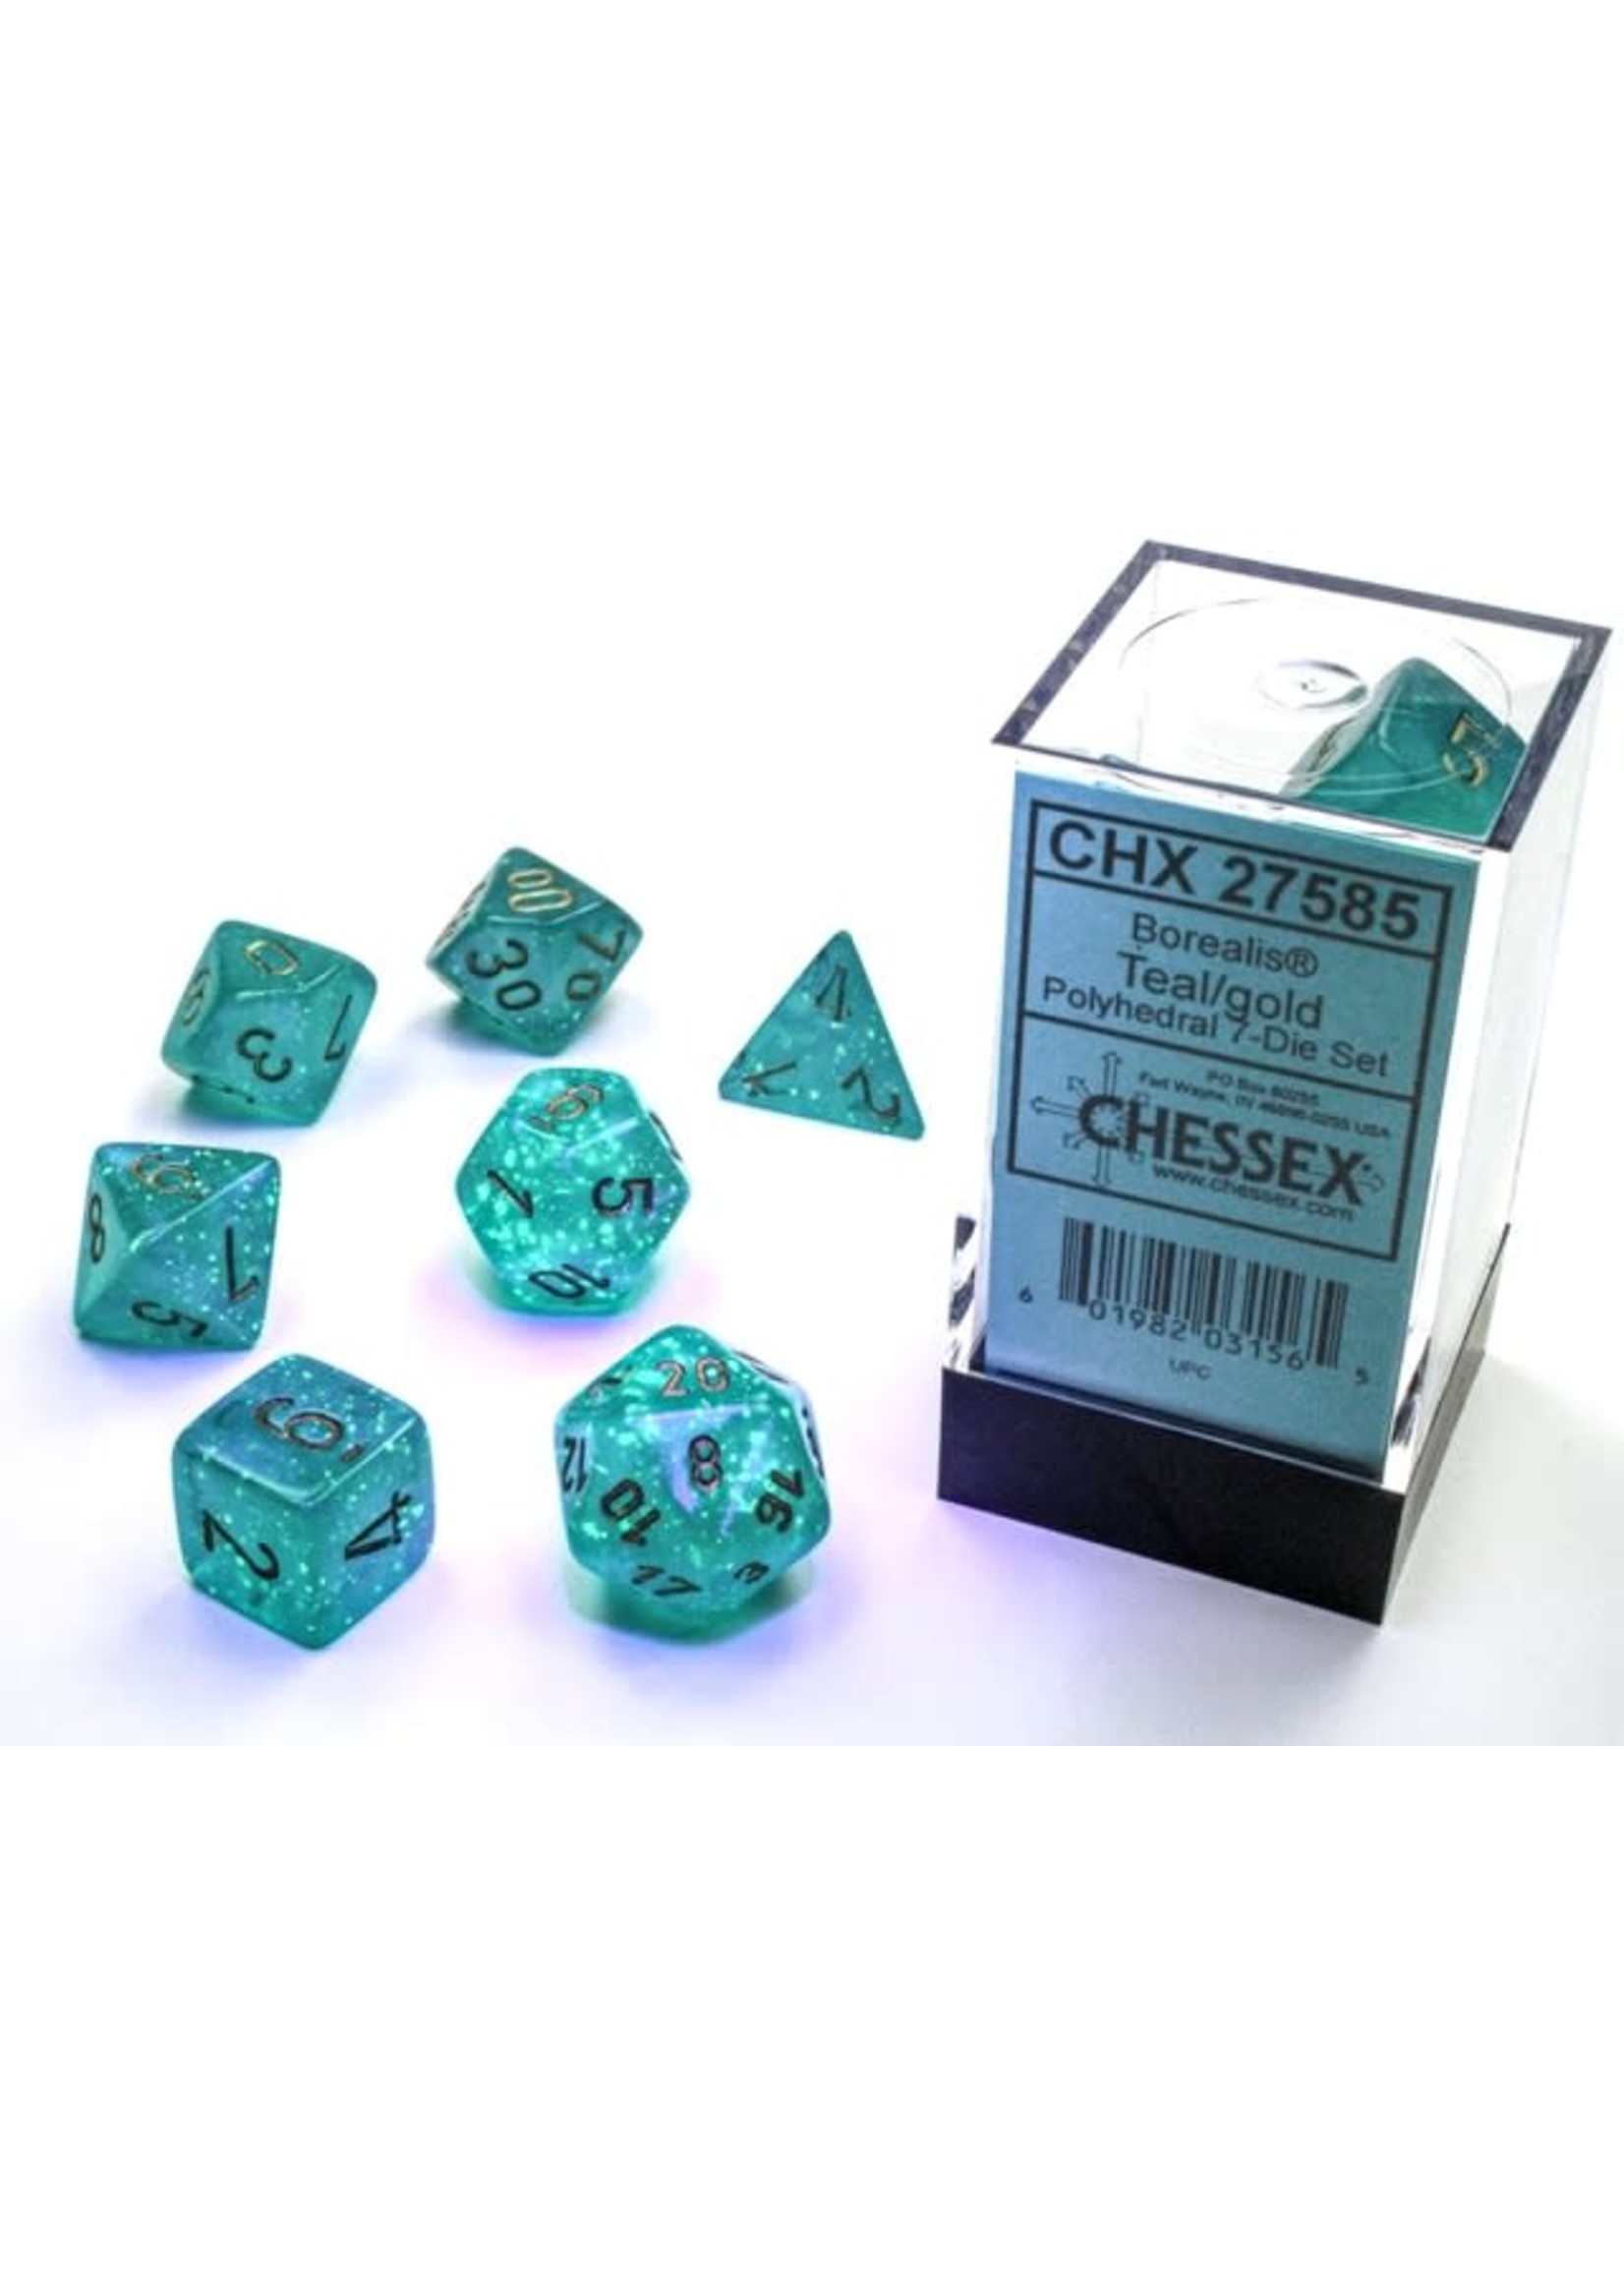 Chessex Borealis Luminary Poly 7 set: Teal w/ Gold